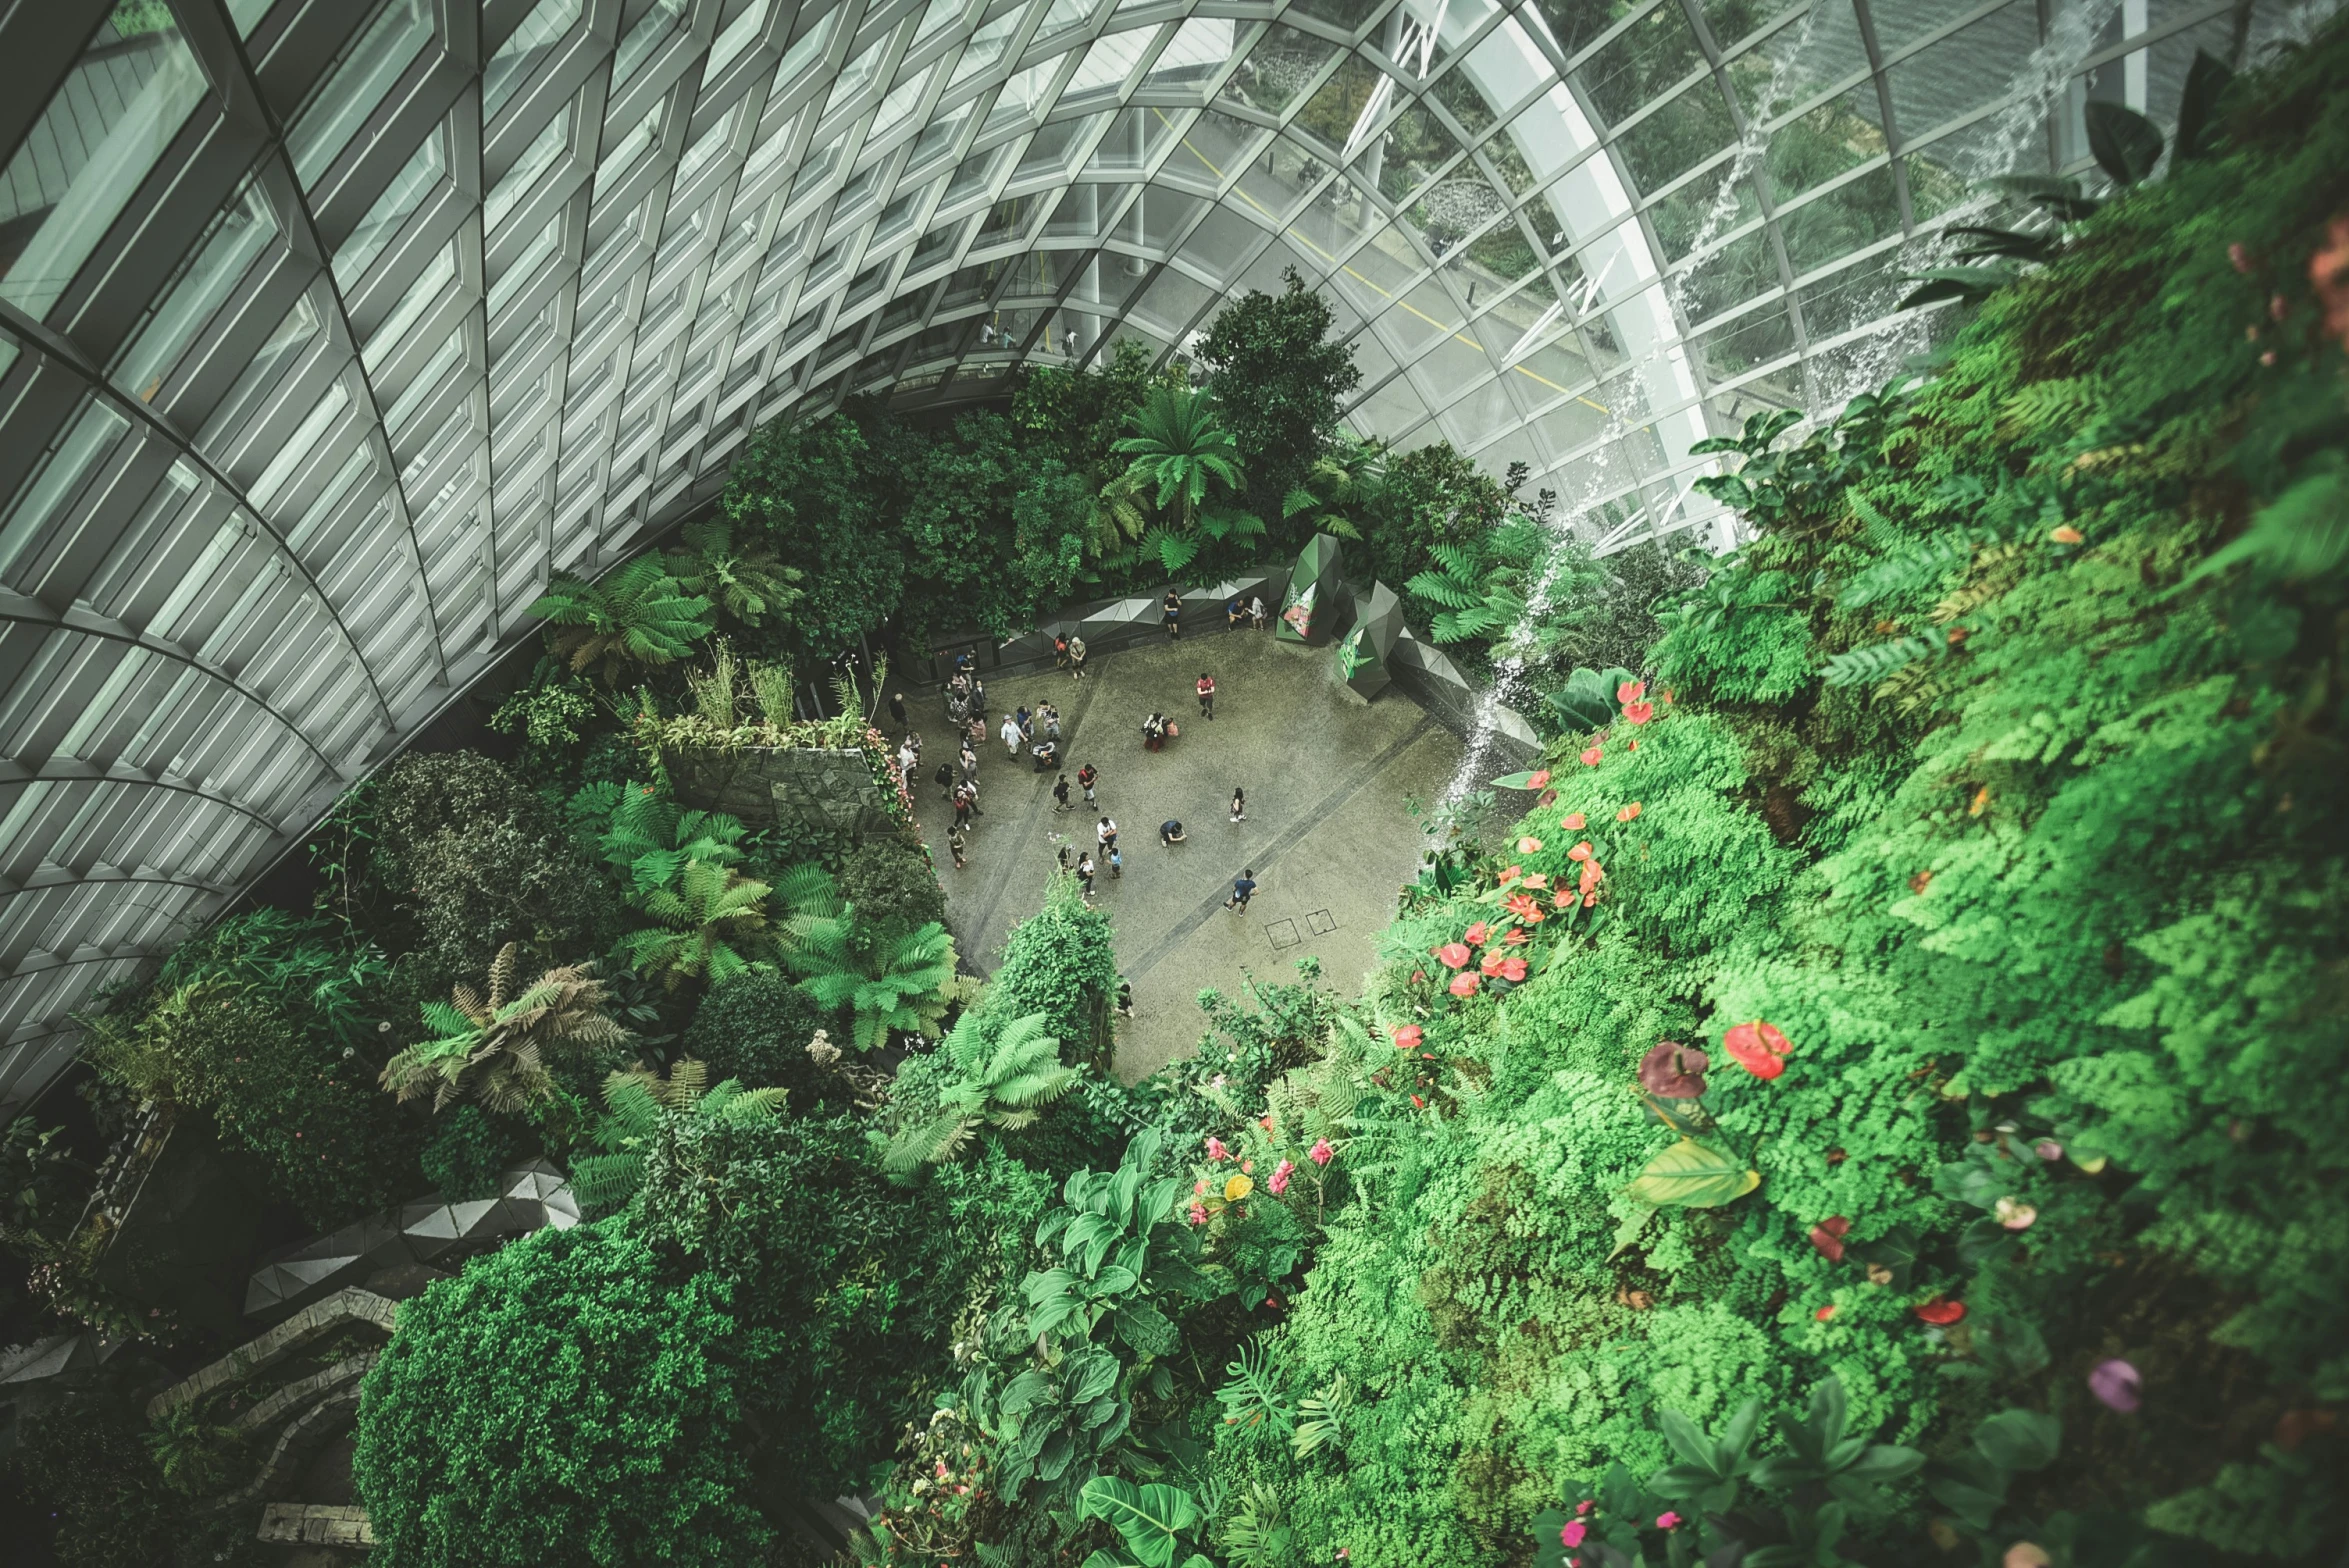 a circular glass room full of plants and animals